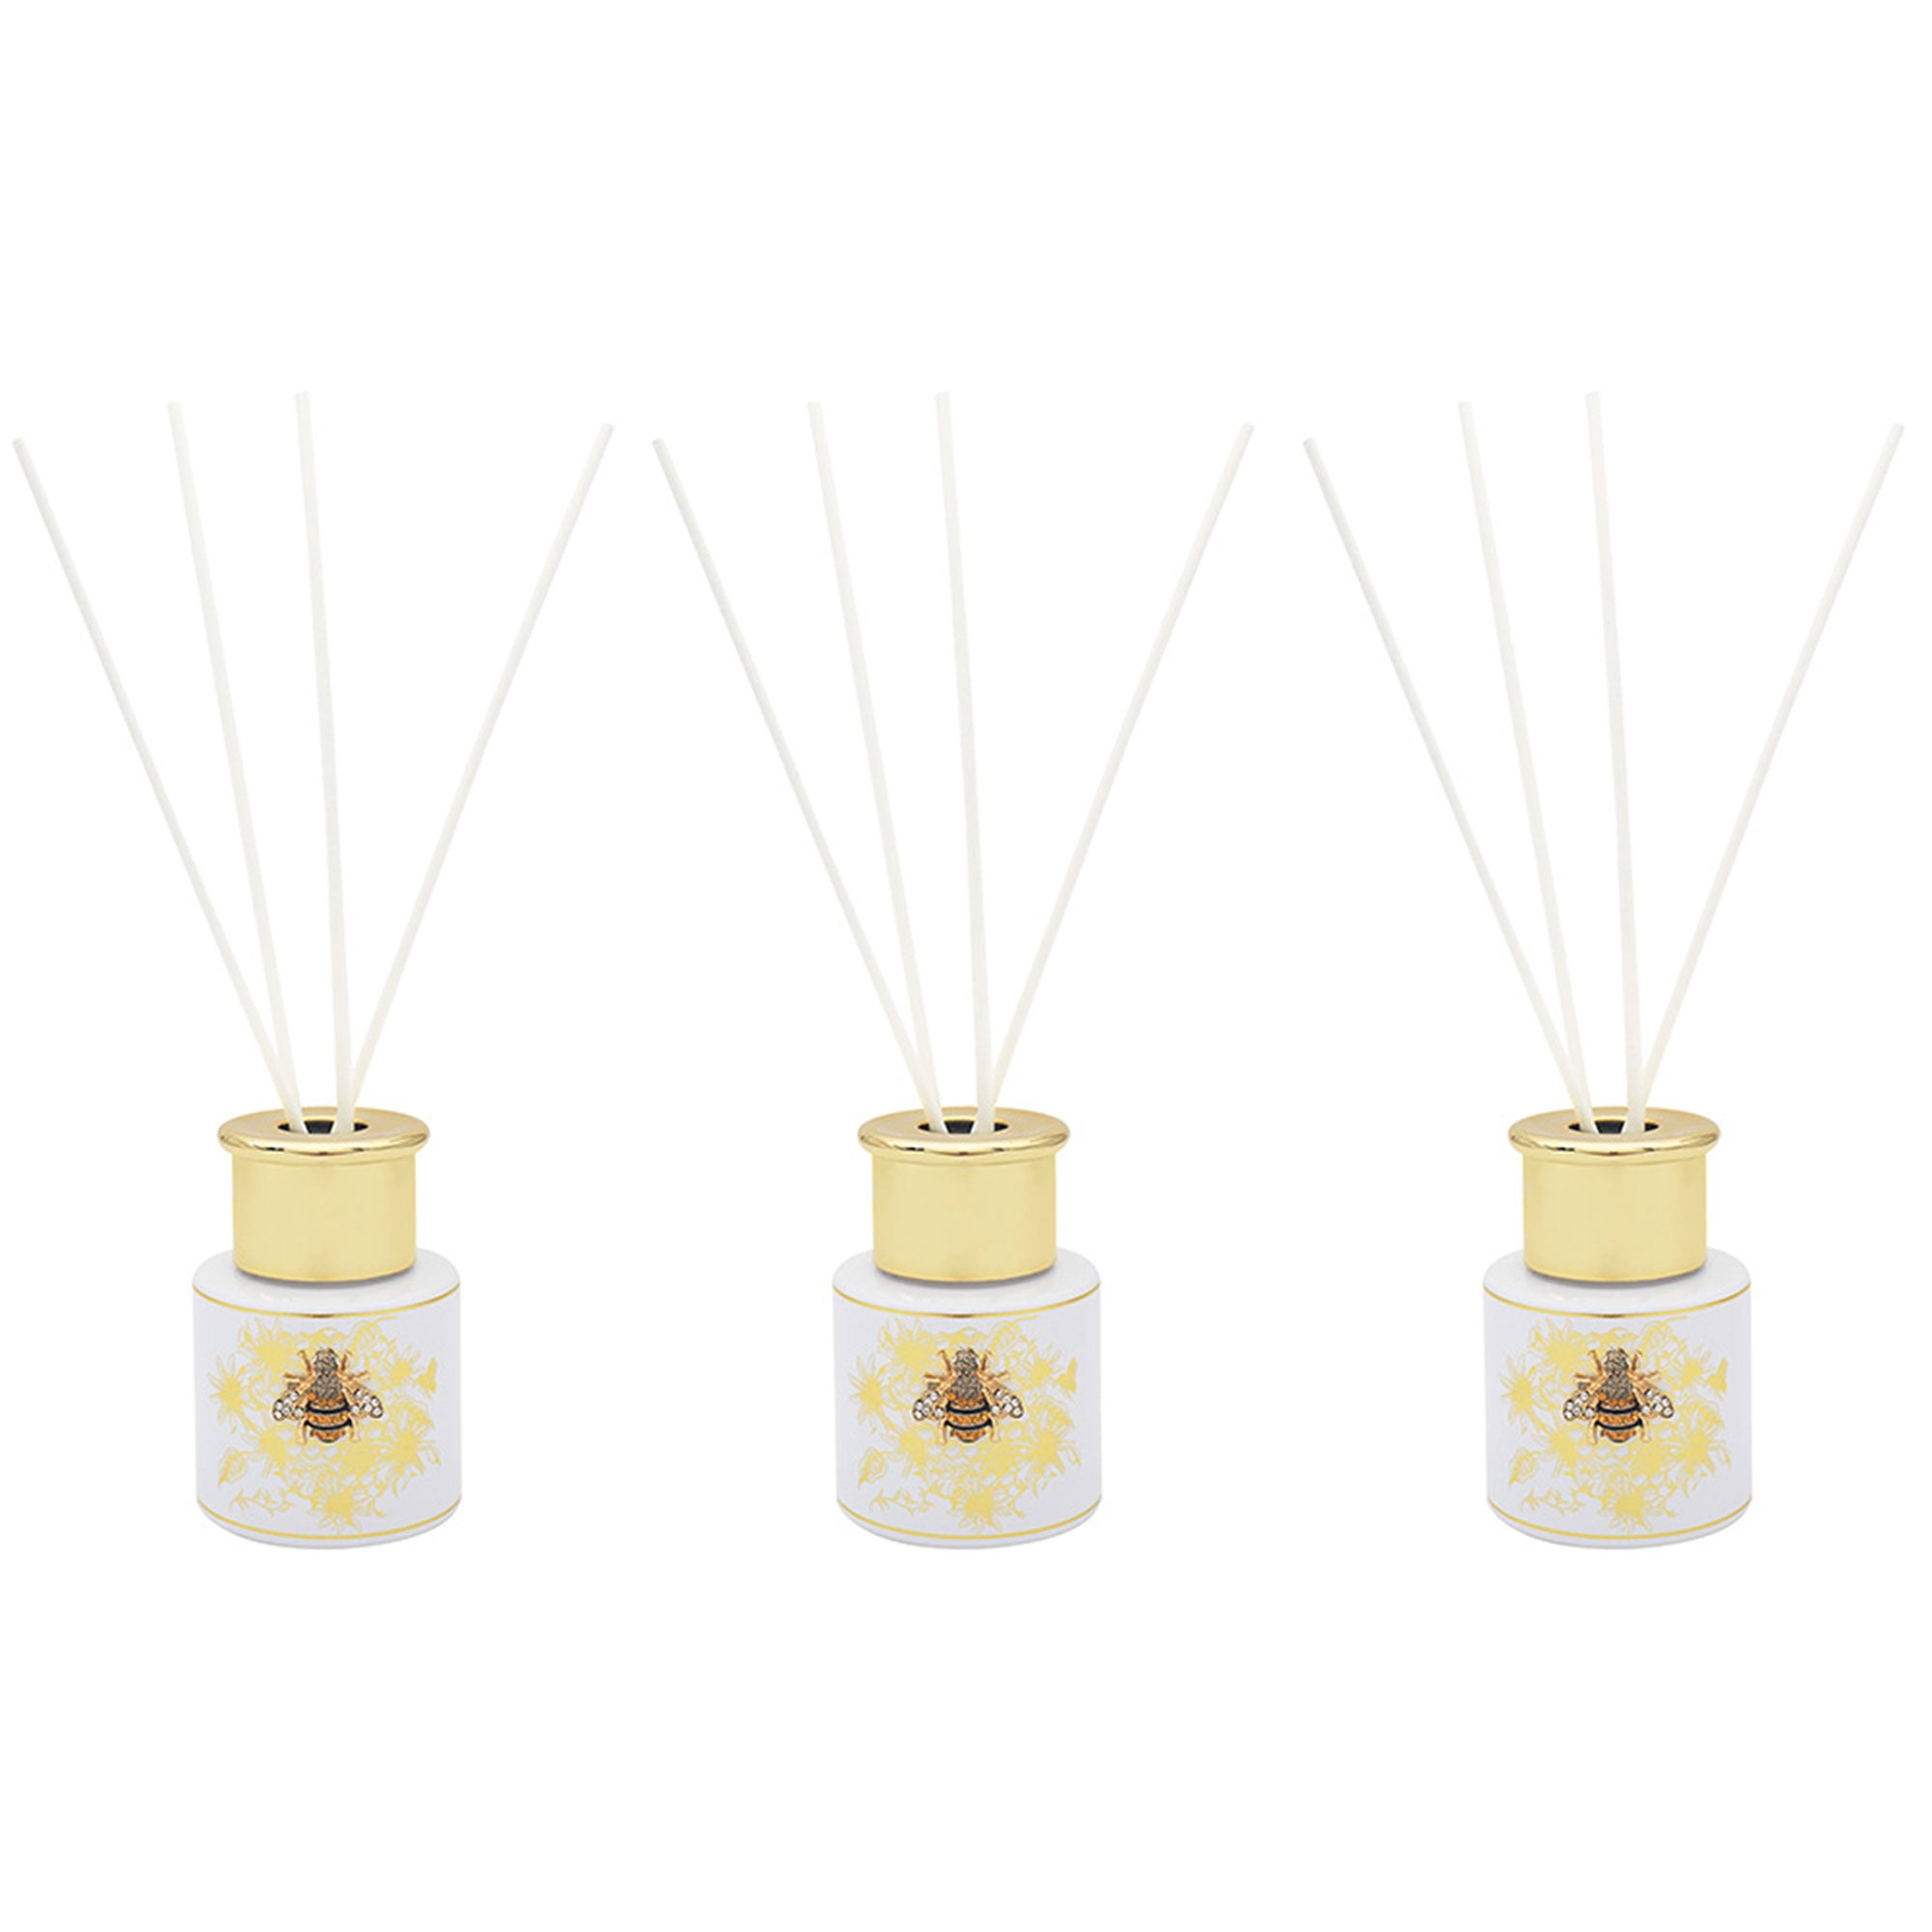 Desire Honeycomb Bees Diffusers S3